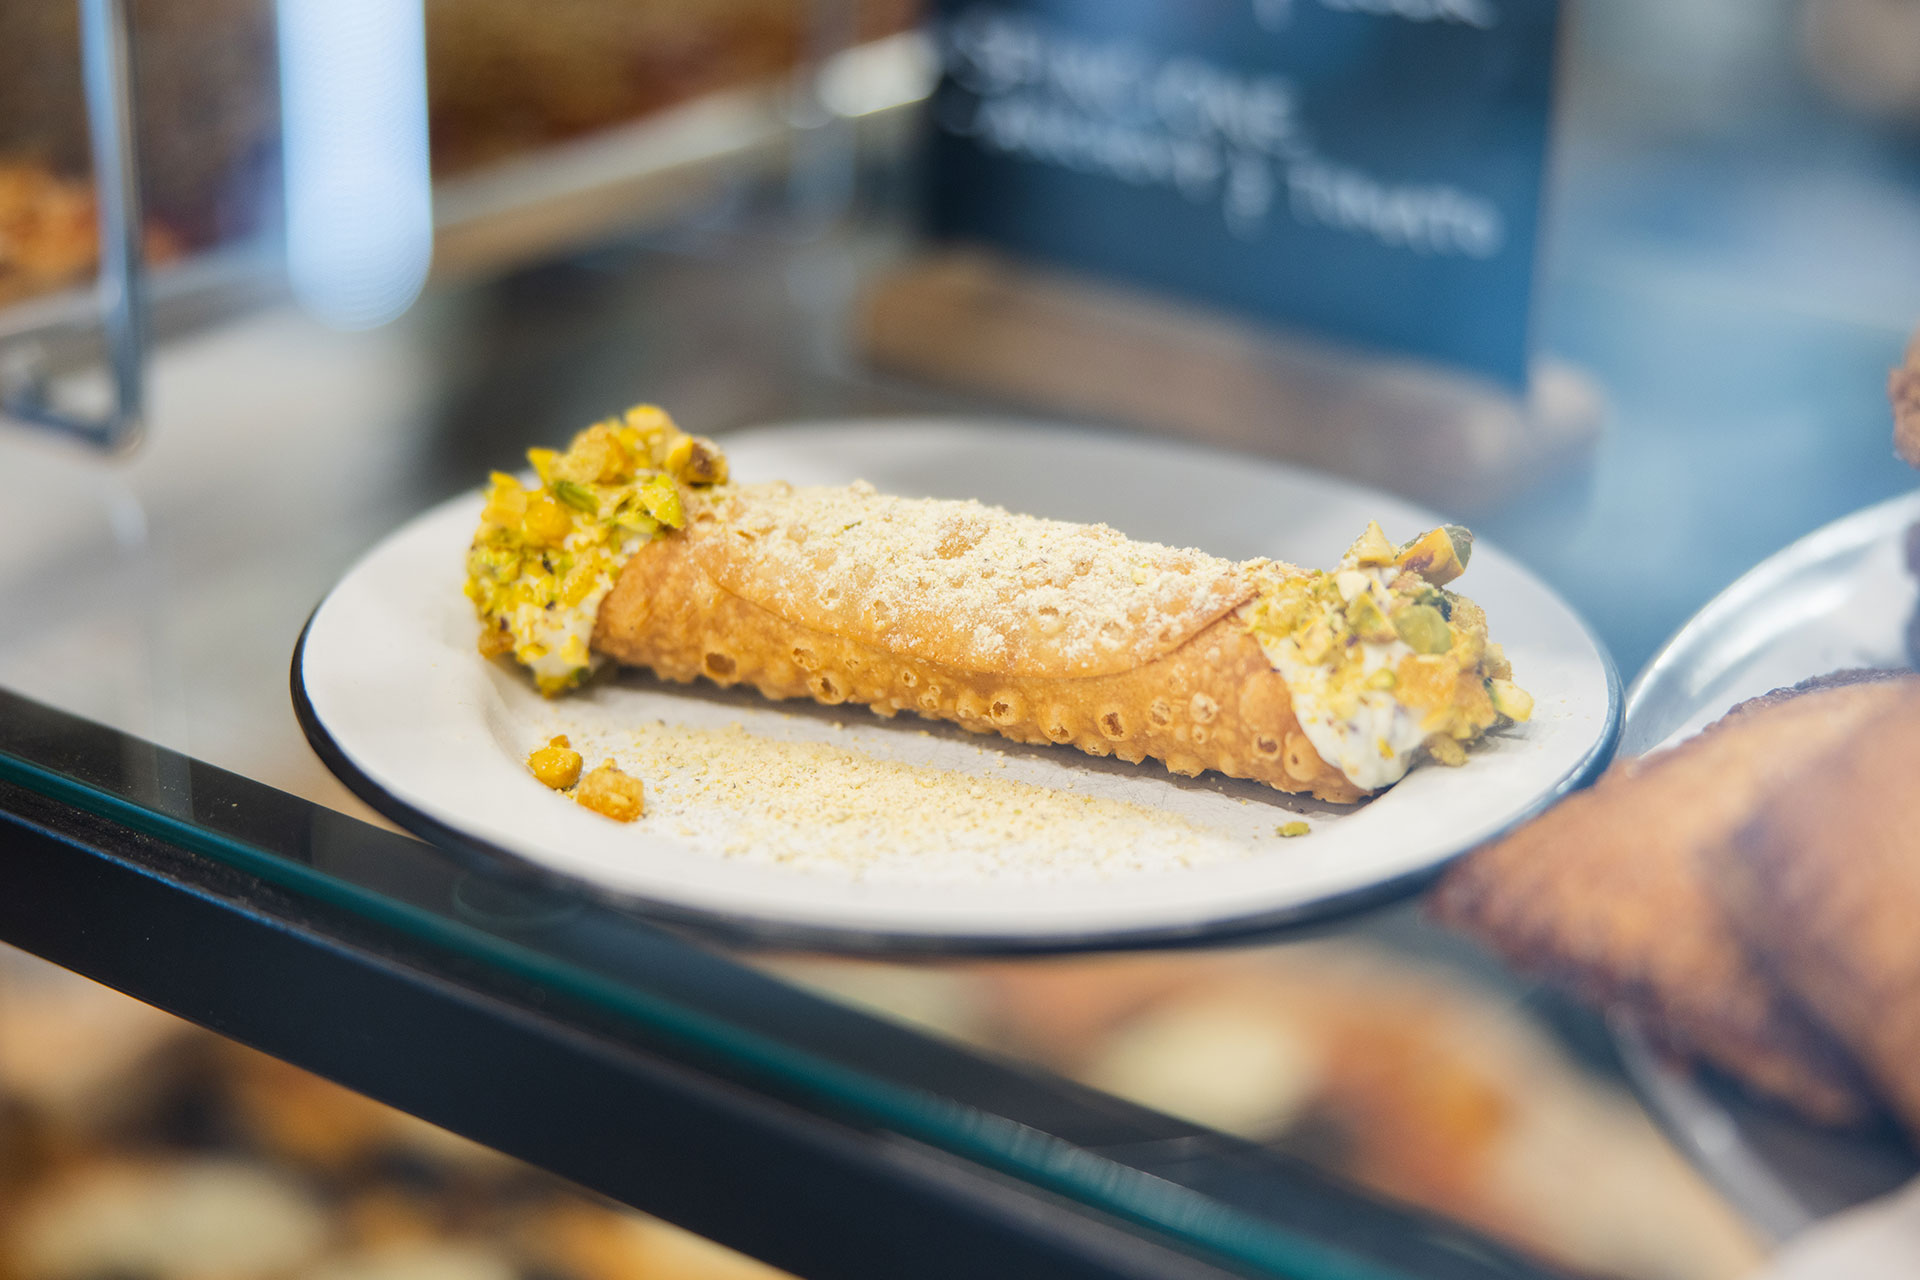 a cannoli in the pastry case at pizza thief